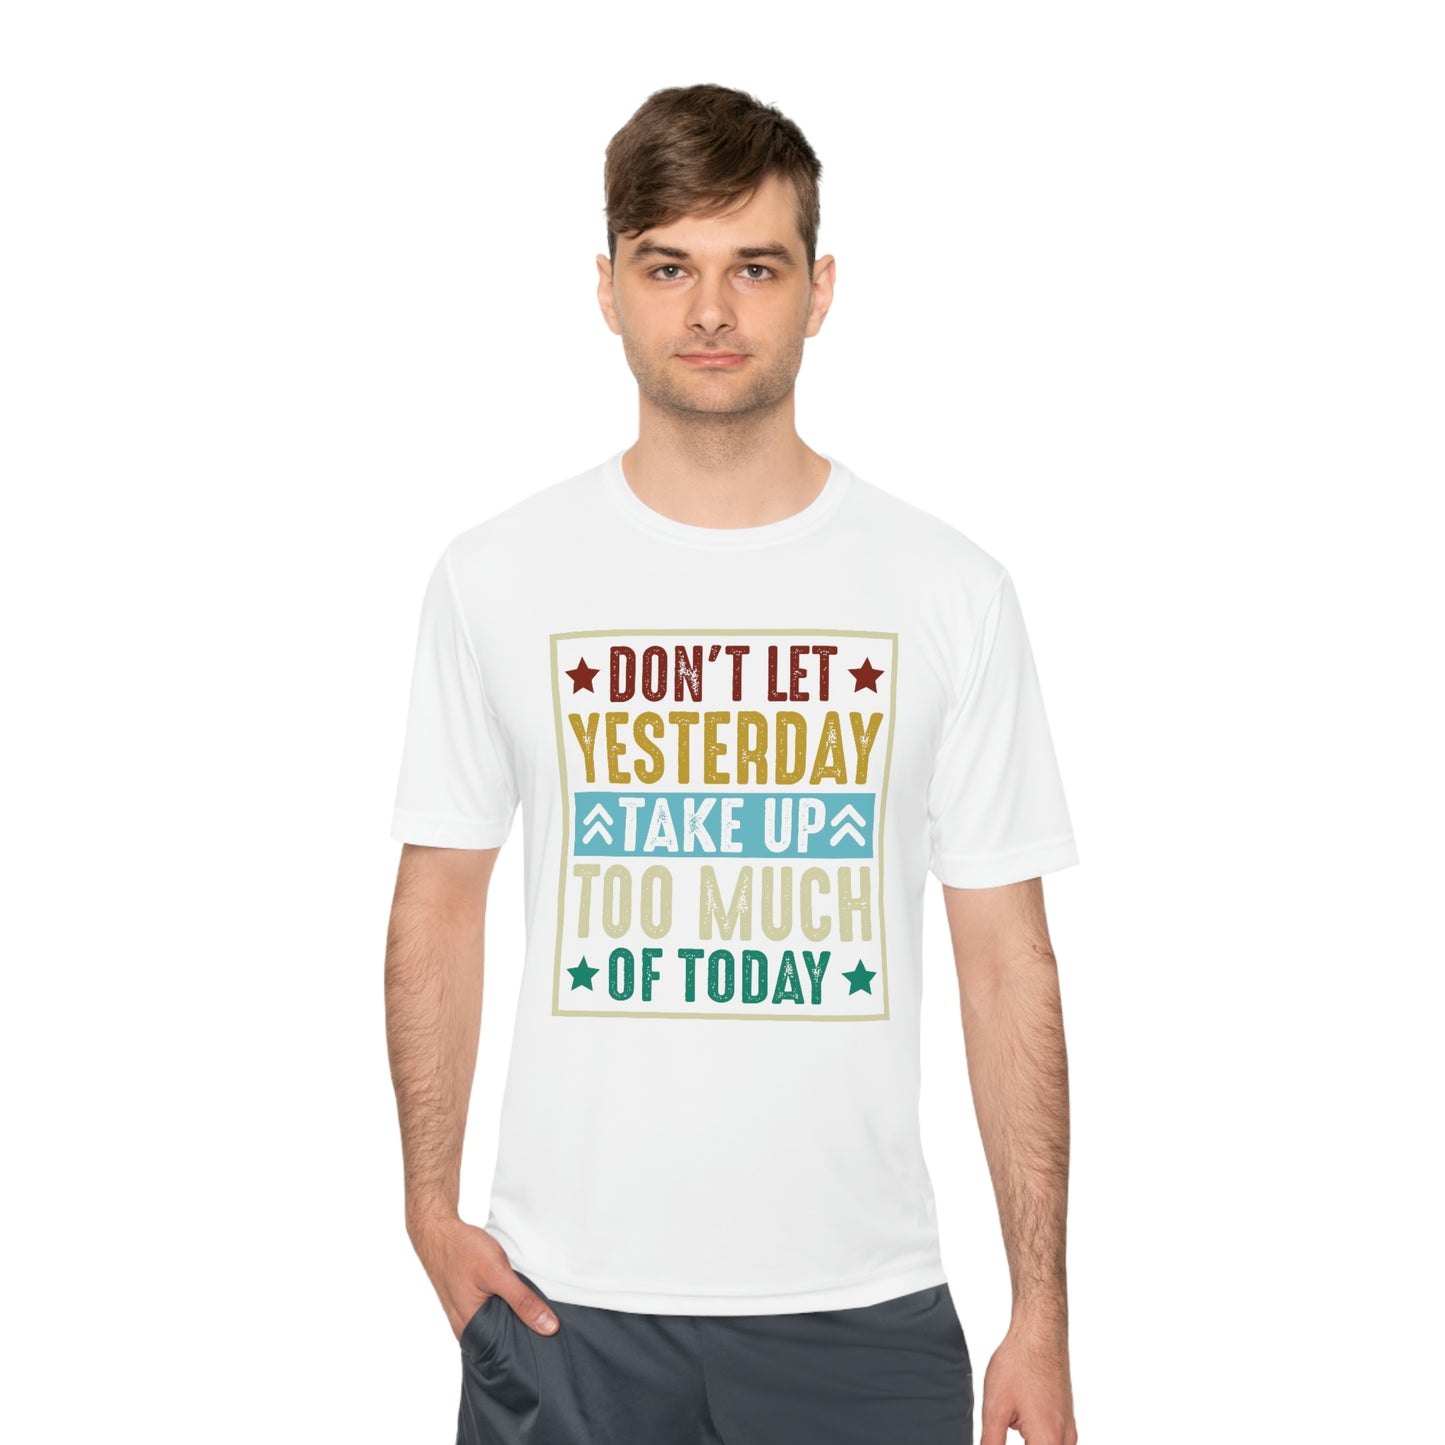 Don't dwell on the past unique tshirt.  Motivational shirt for men or women